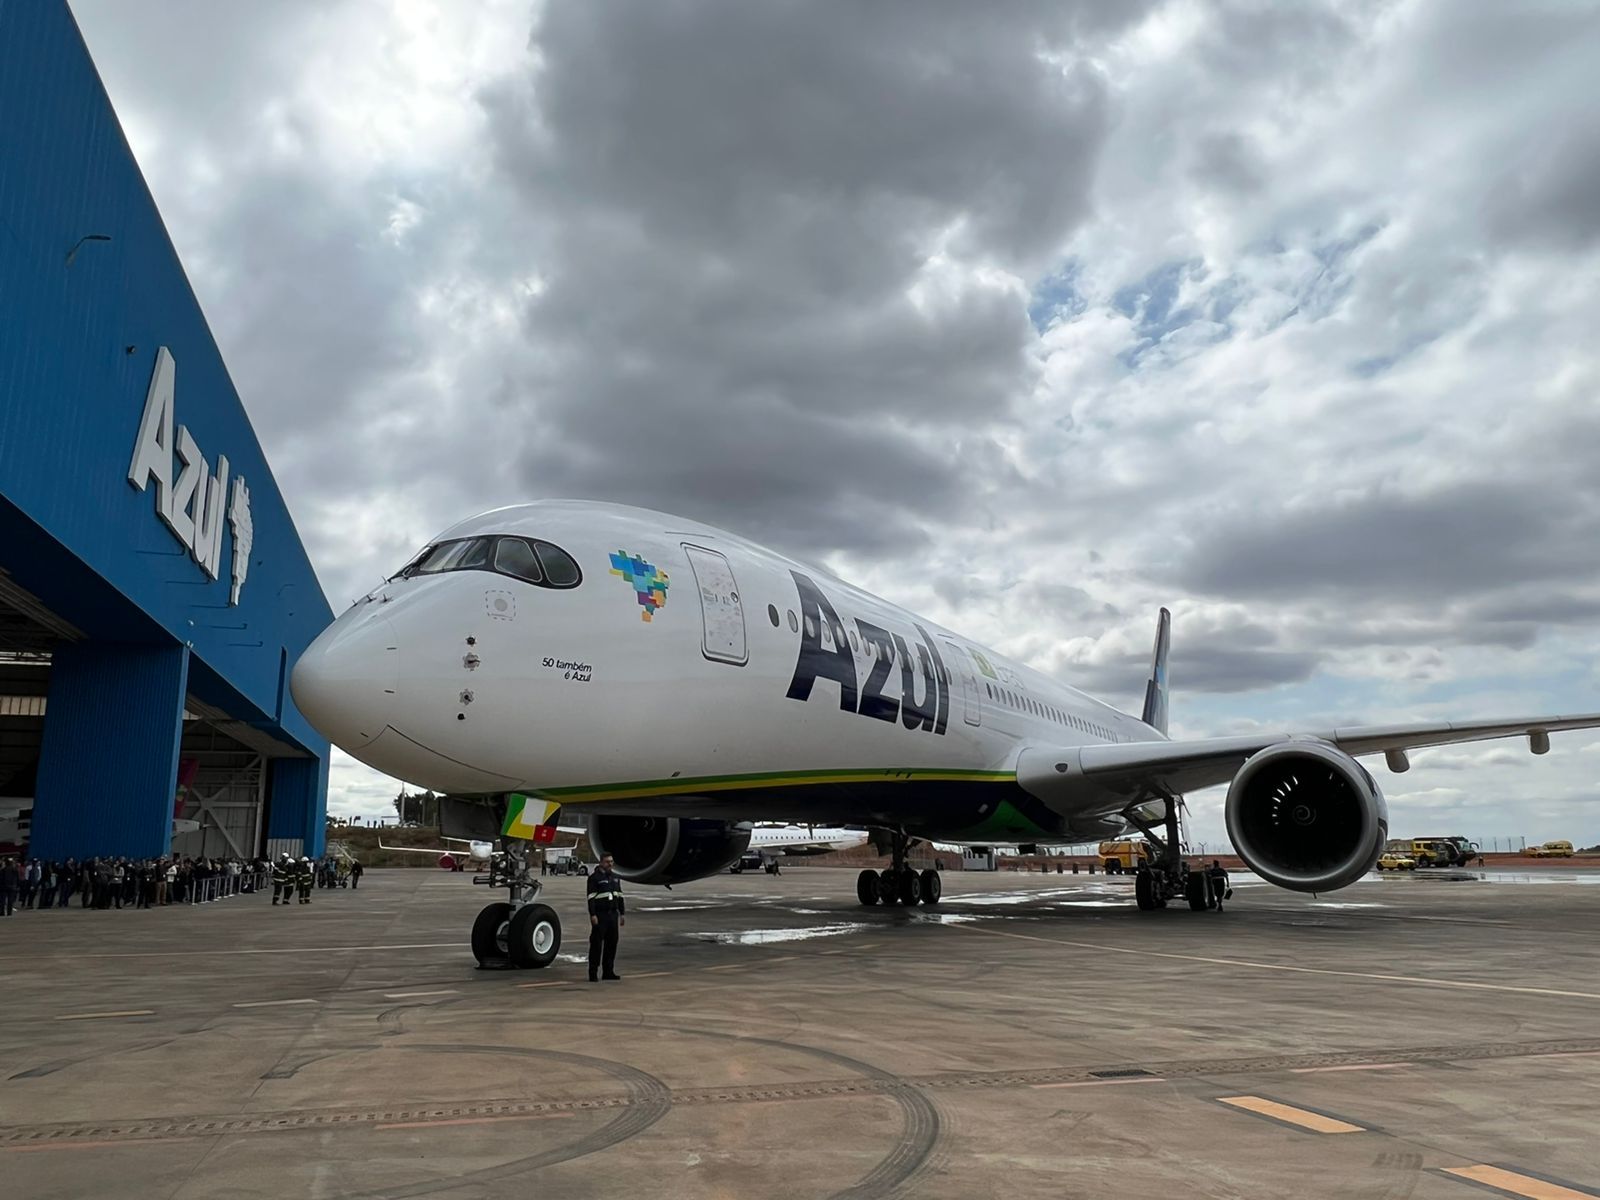 An Azul Airbus A350 aircraft parked outside of a hangar.